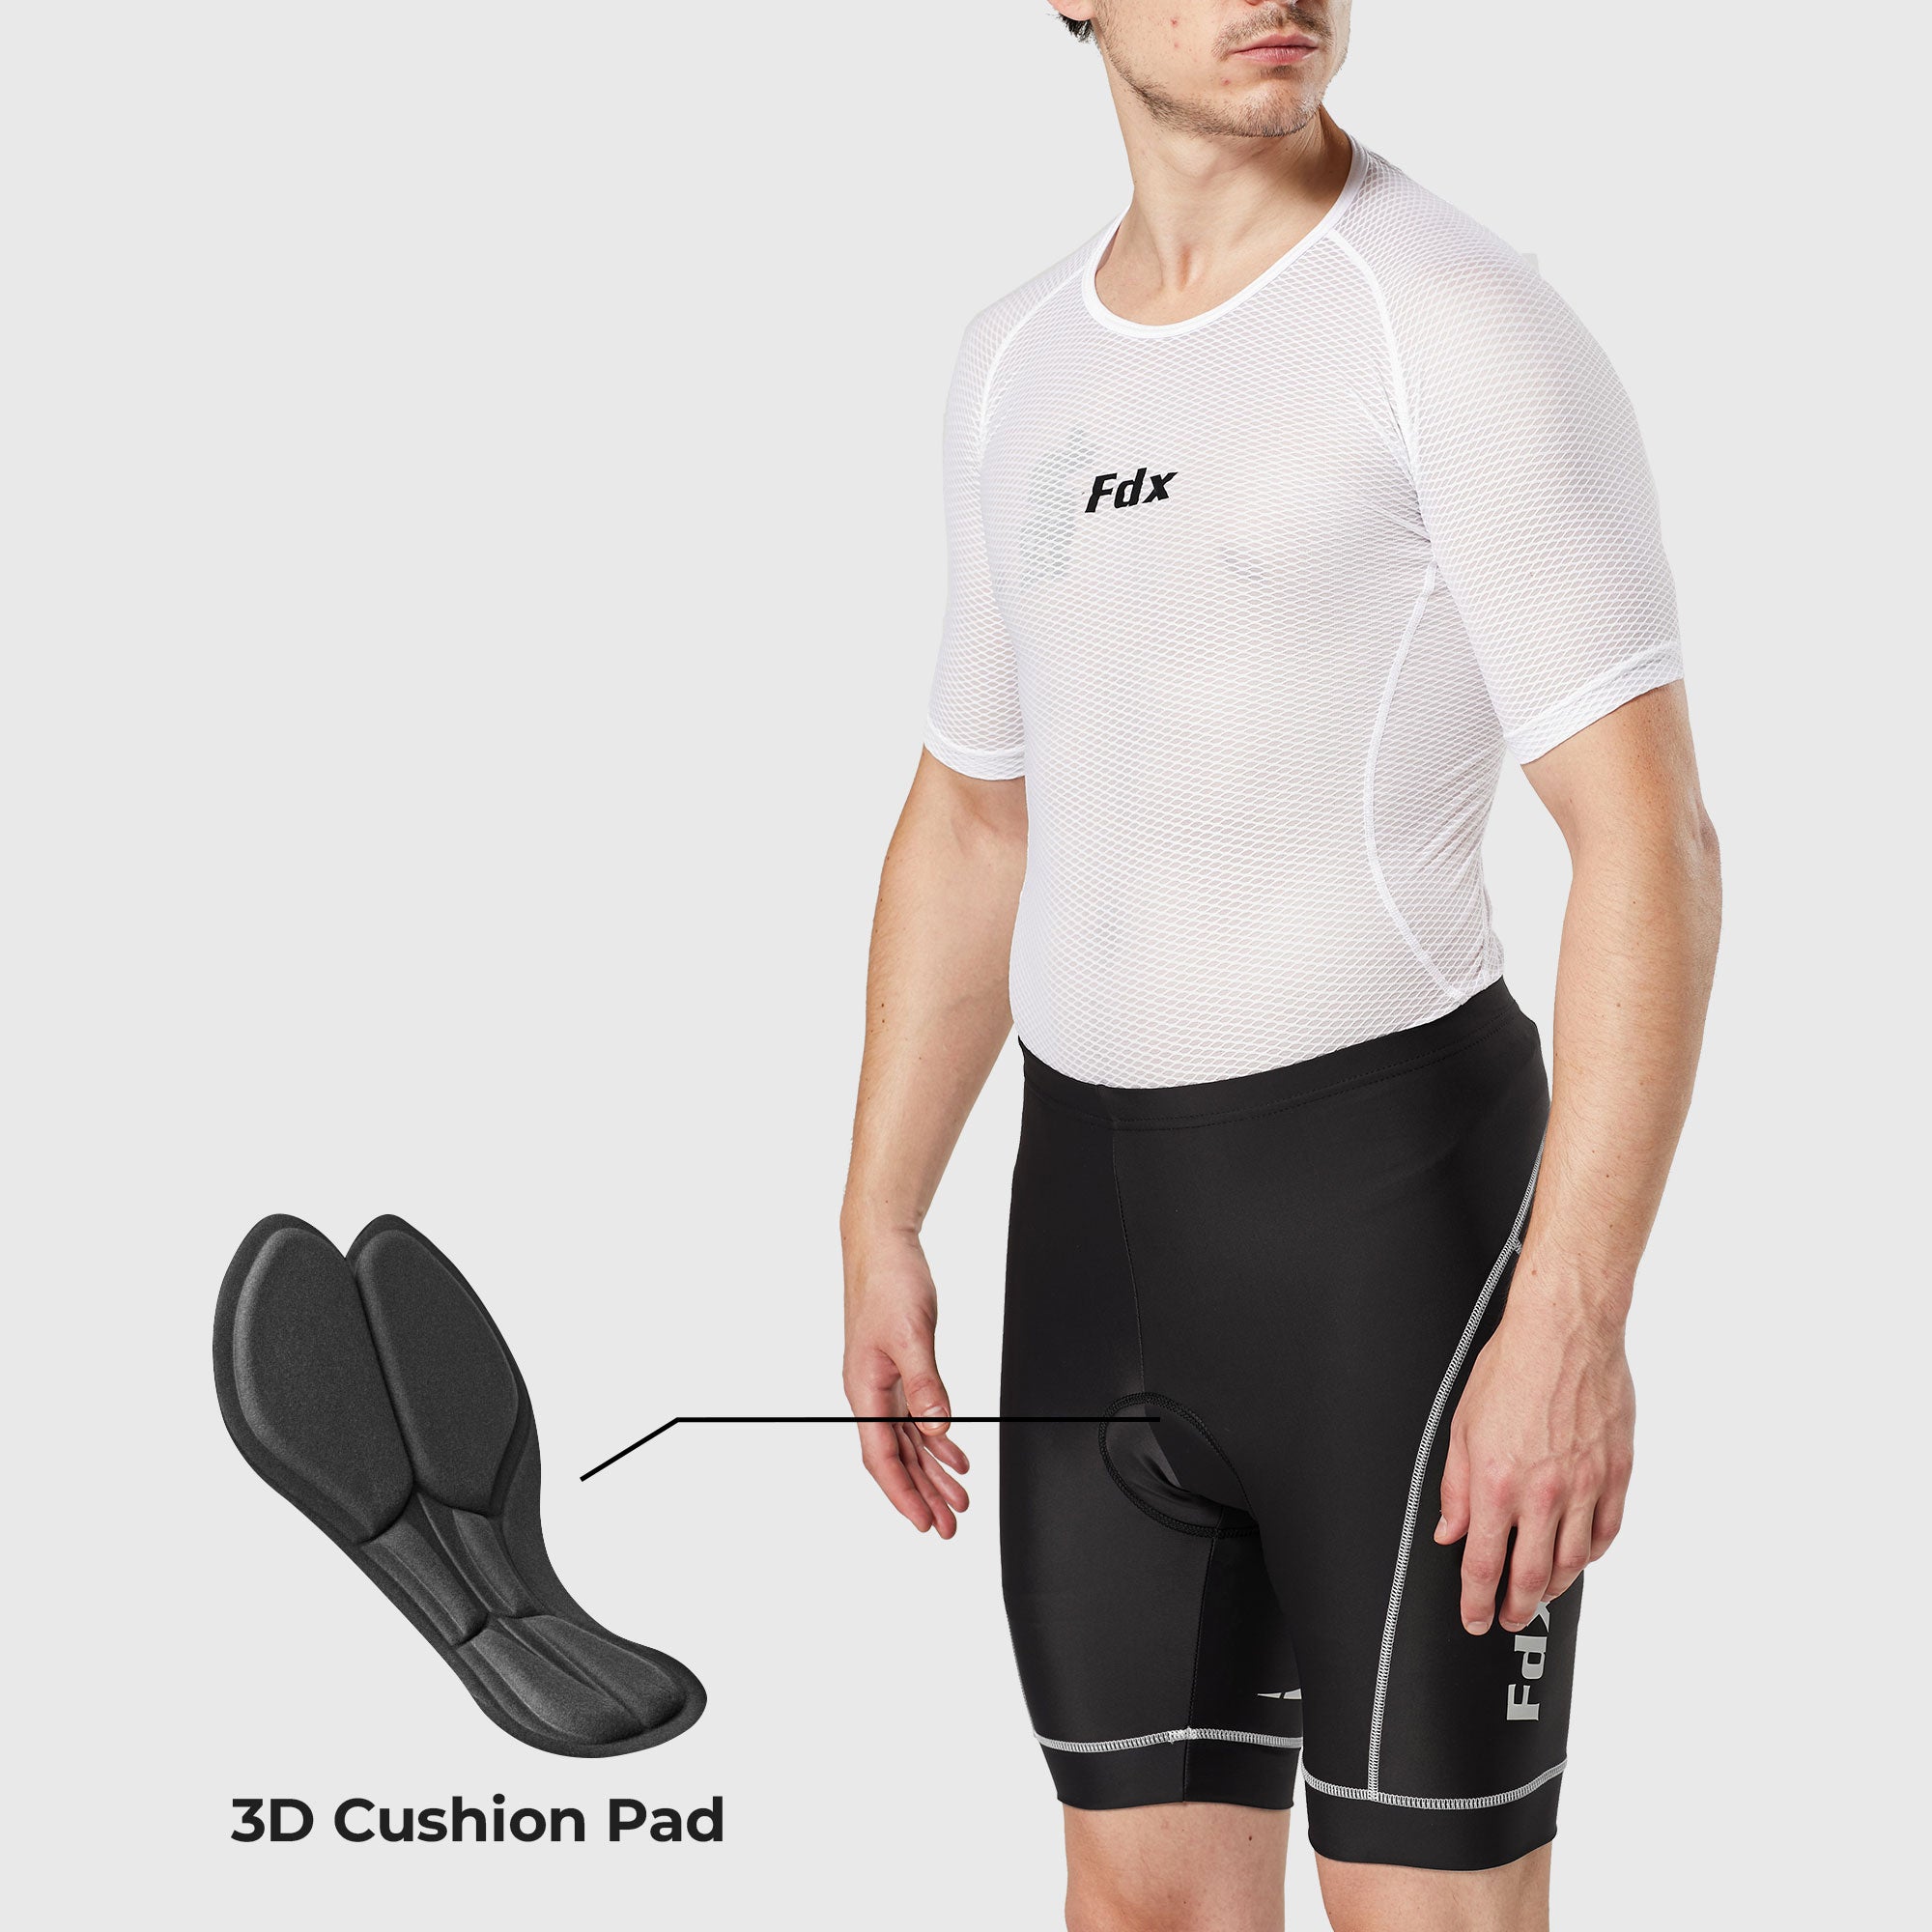 Fdx Men's Black & White Gel Padded Cycling Shorts for Summer Best Outdoor Knickers Road Bike Short Length Pants - Ridest